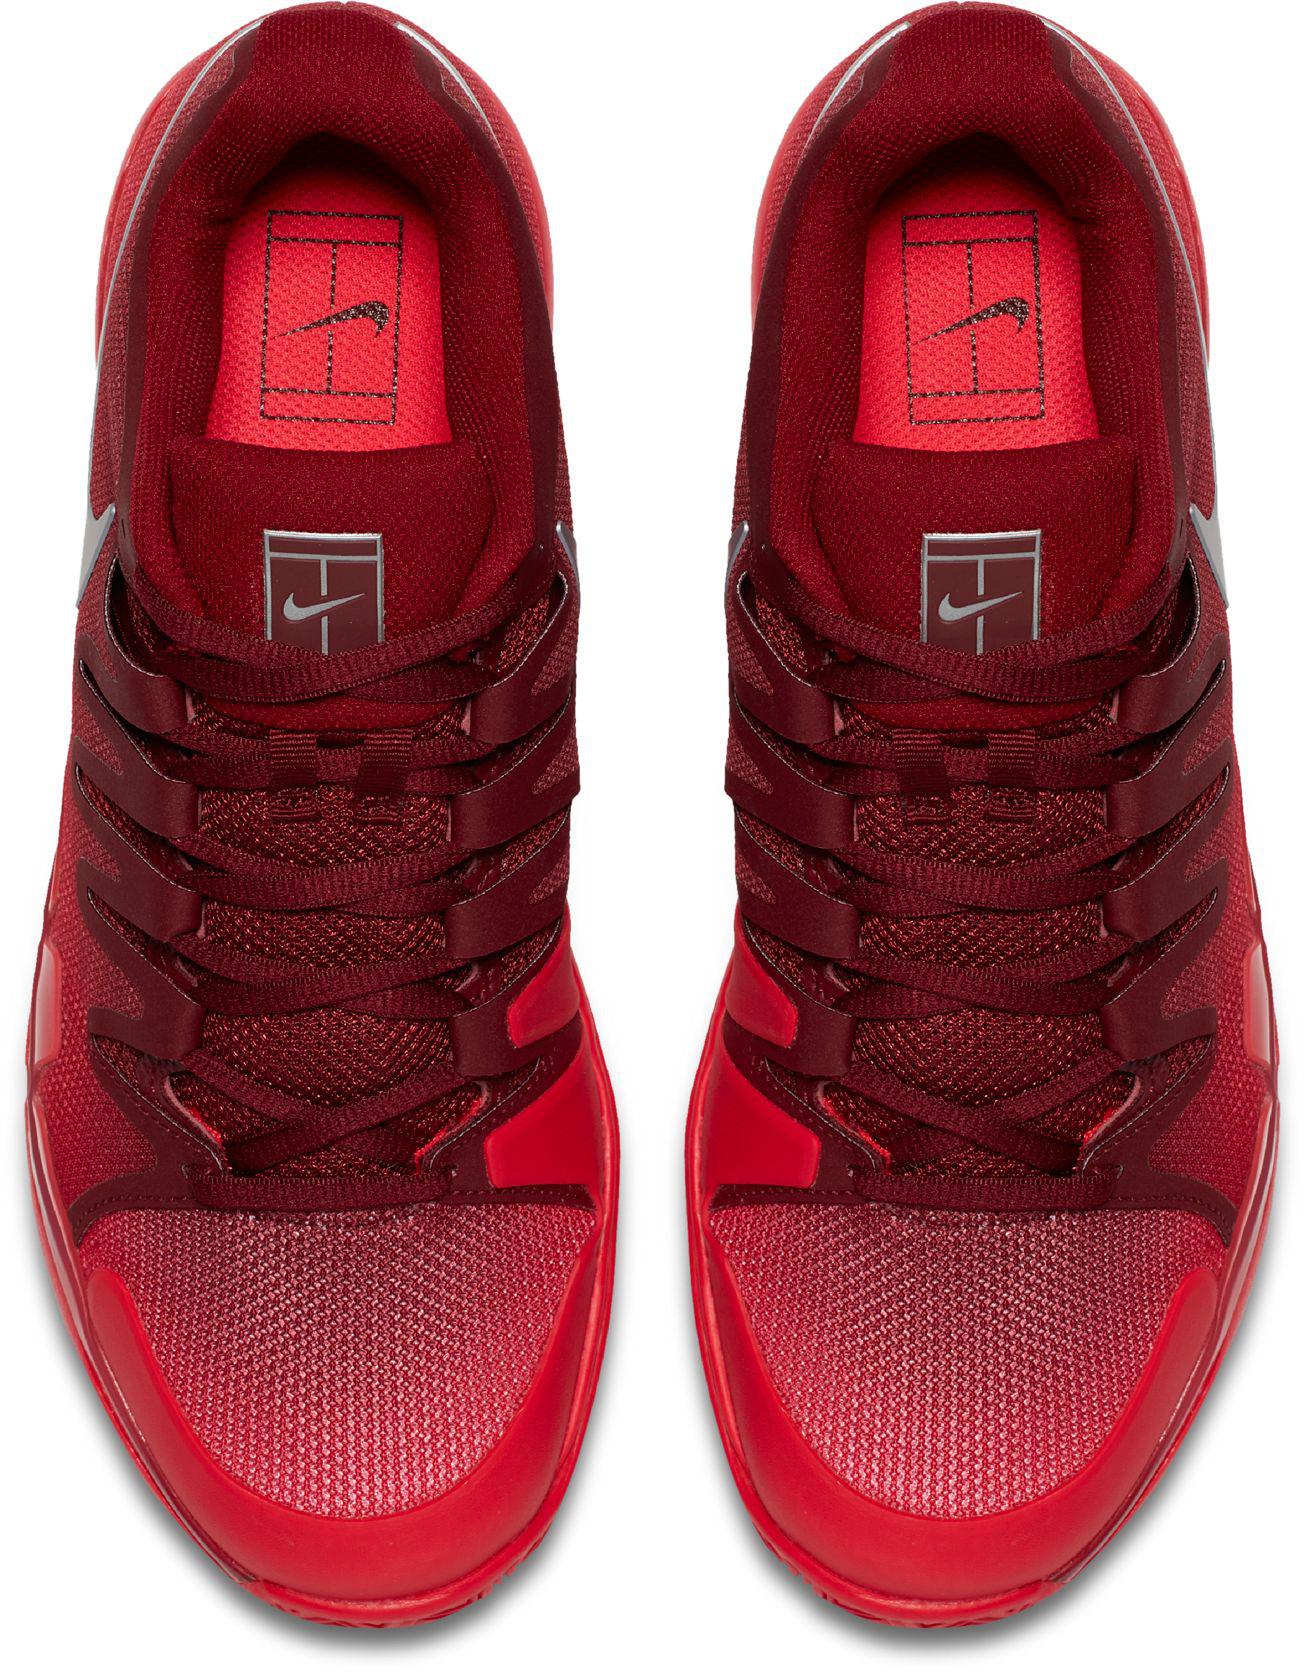 mens red tennis shoes